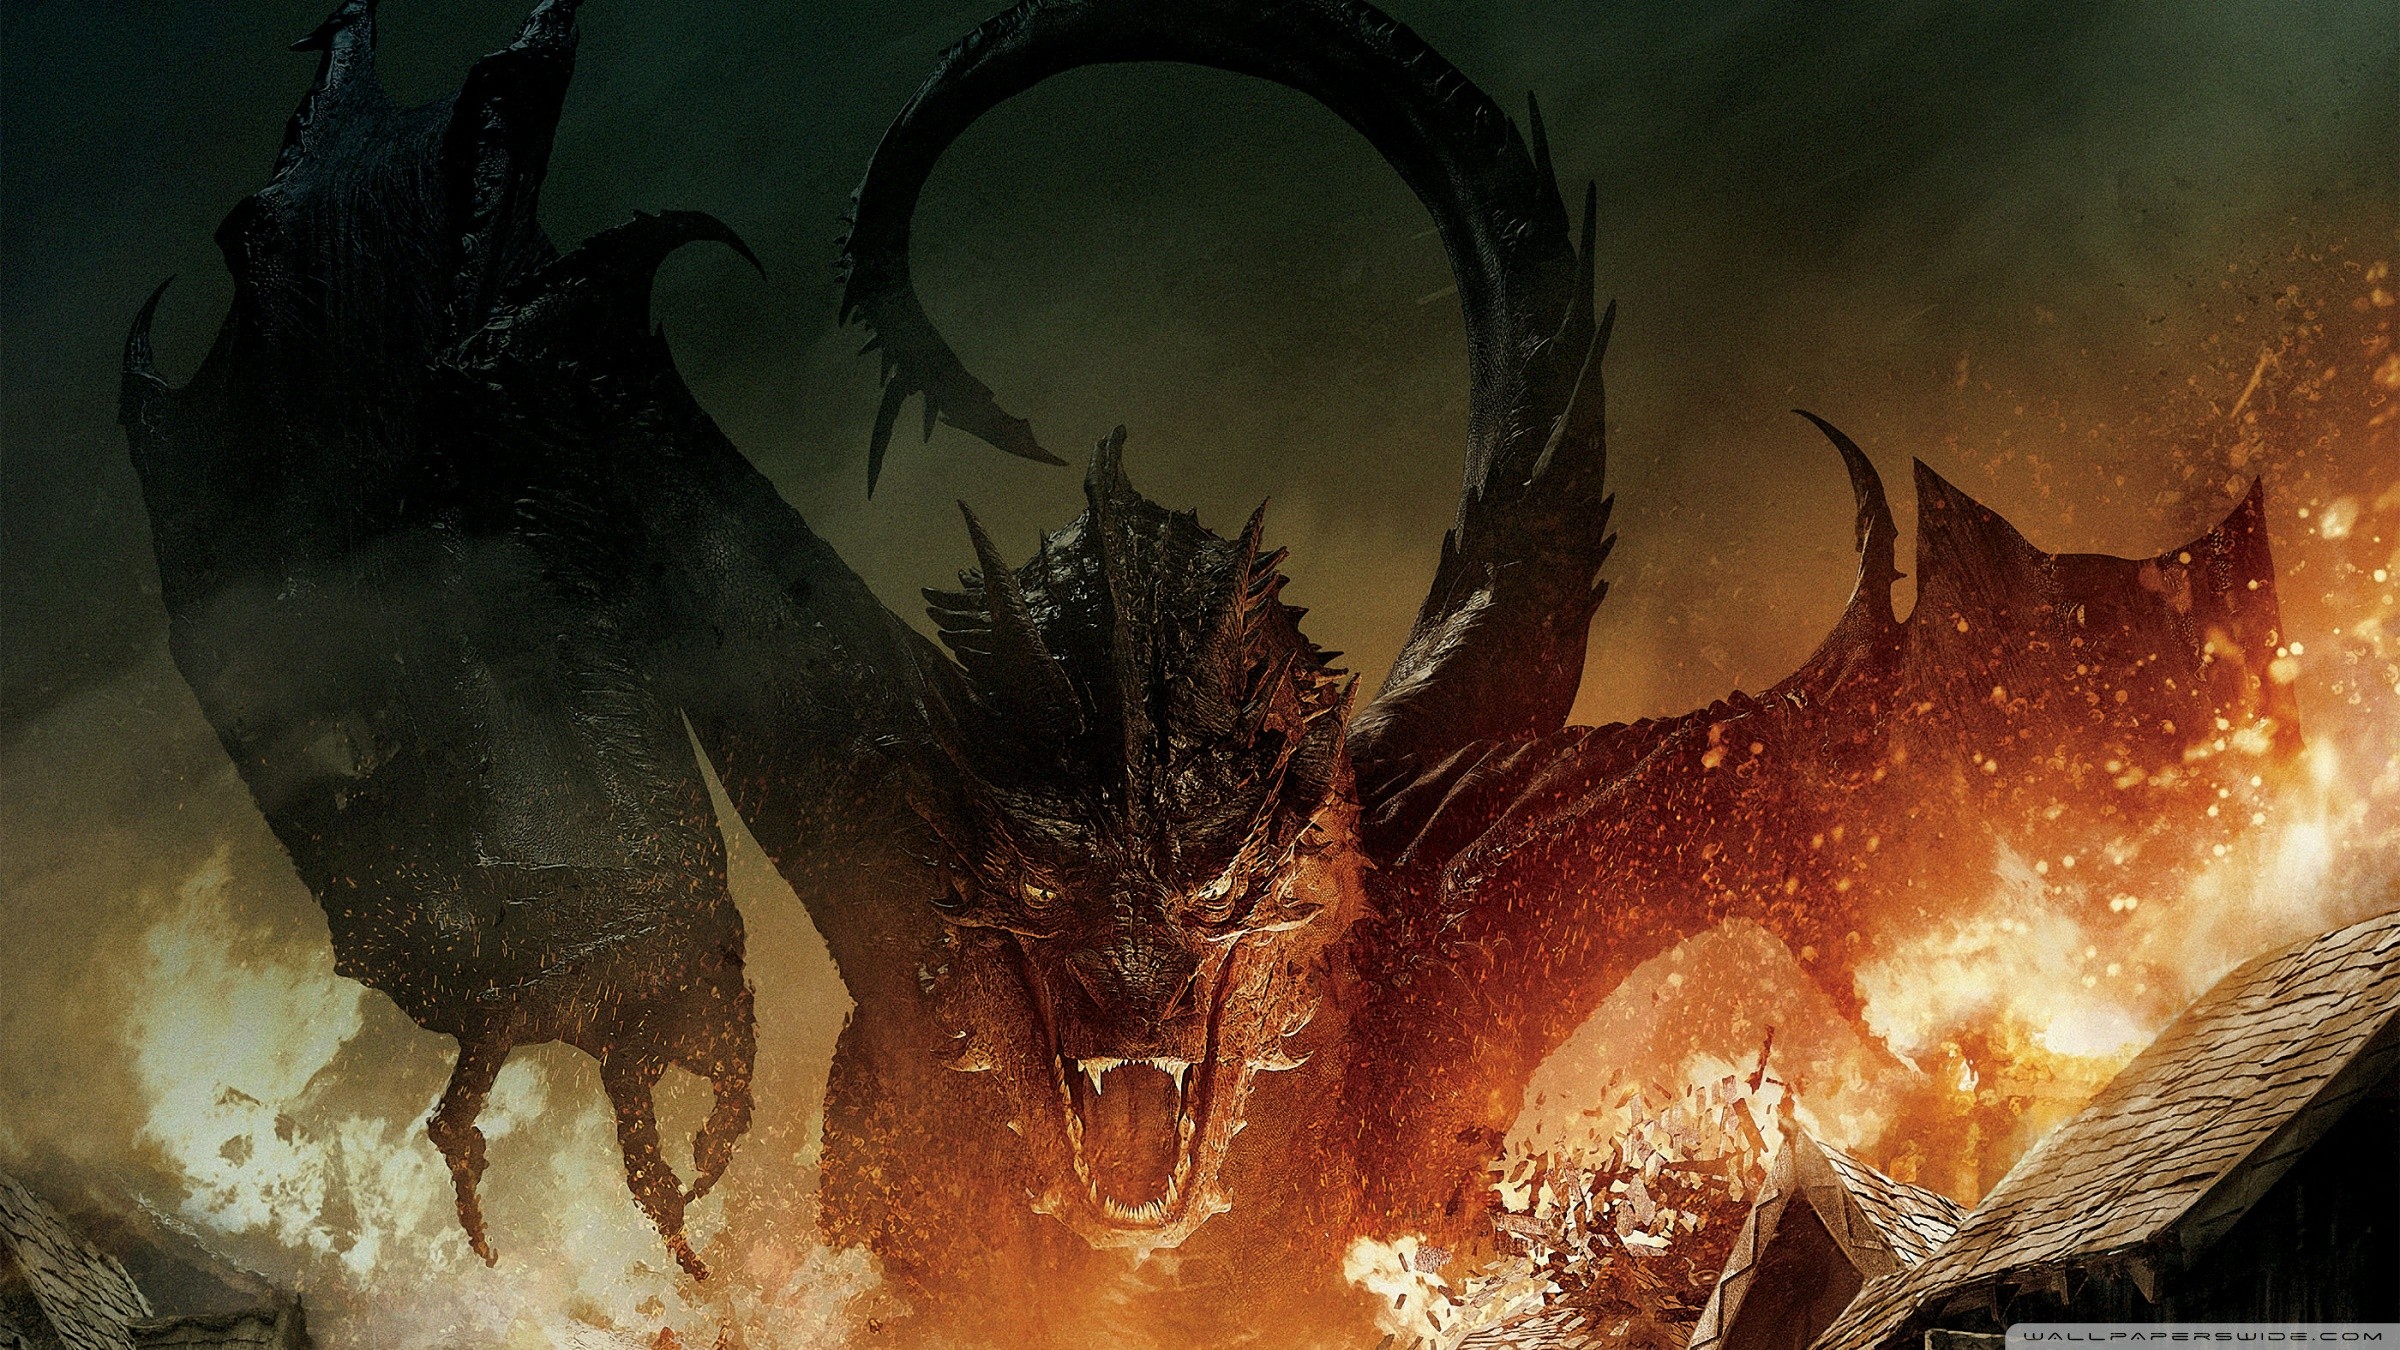 General 2400x1350 Smaug The Hobbit dragon movies creature fire